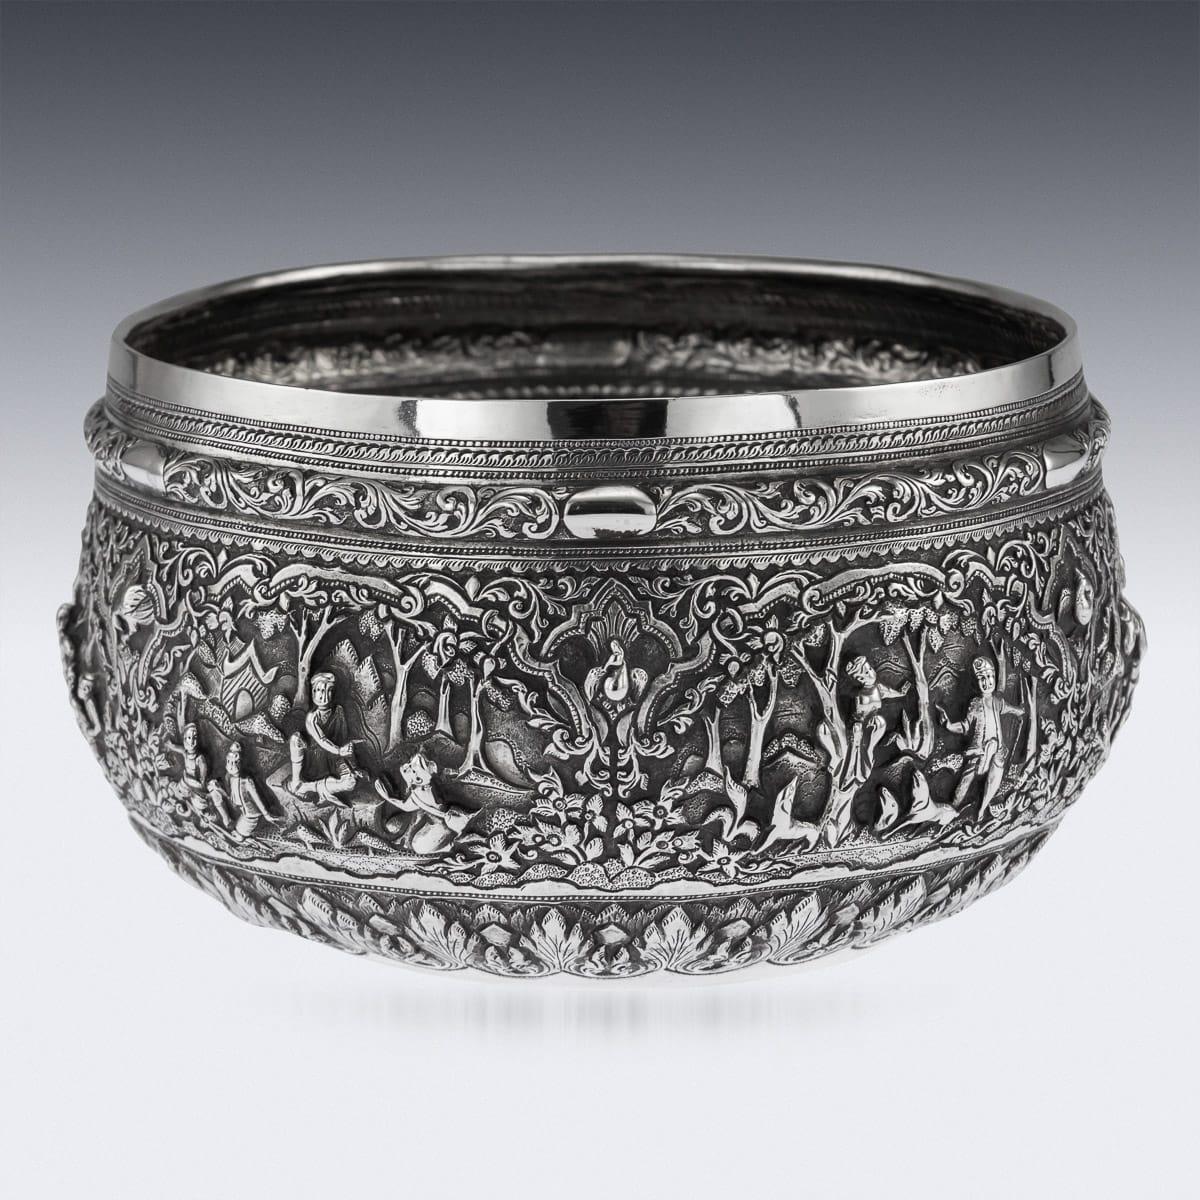 Antique late 19th century Burmese (Myanmar) solid silver repousse' bowl, repousse' decorated in high relief with scenes from the Burmese mythology, representing various figures and animals in a landscape, with very detailed scenes, the base